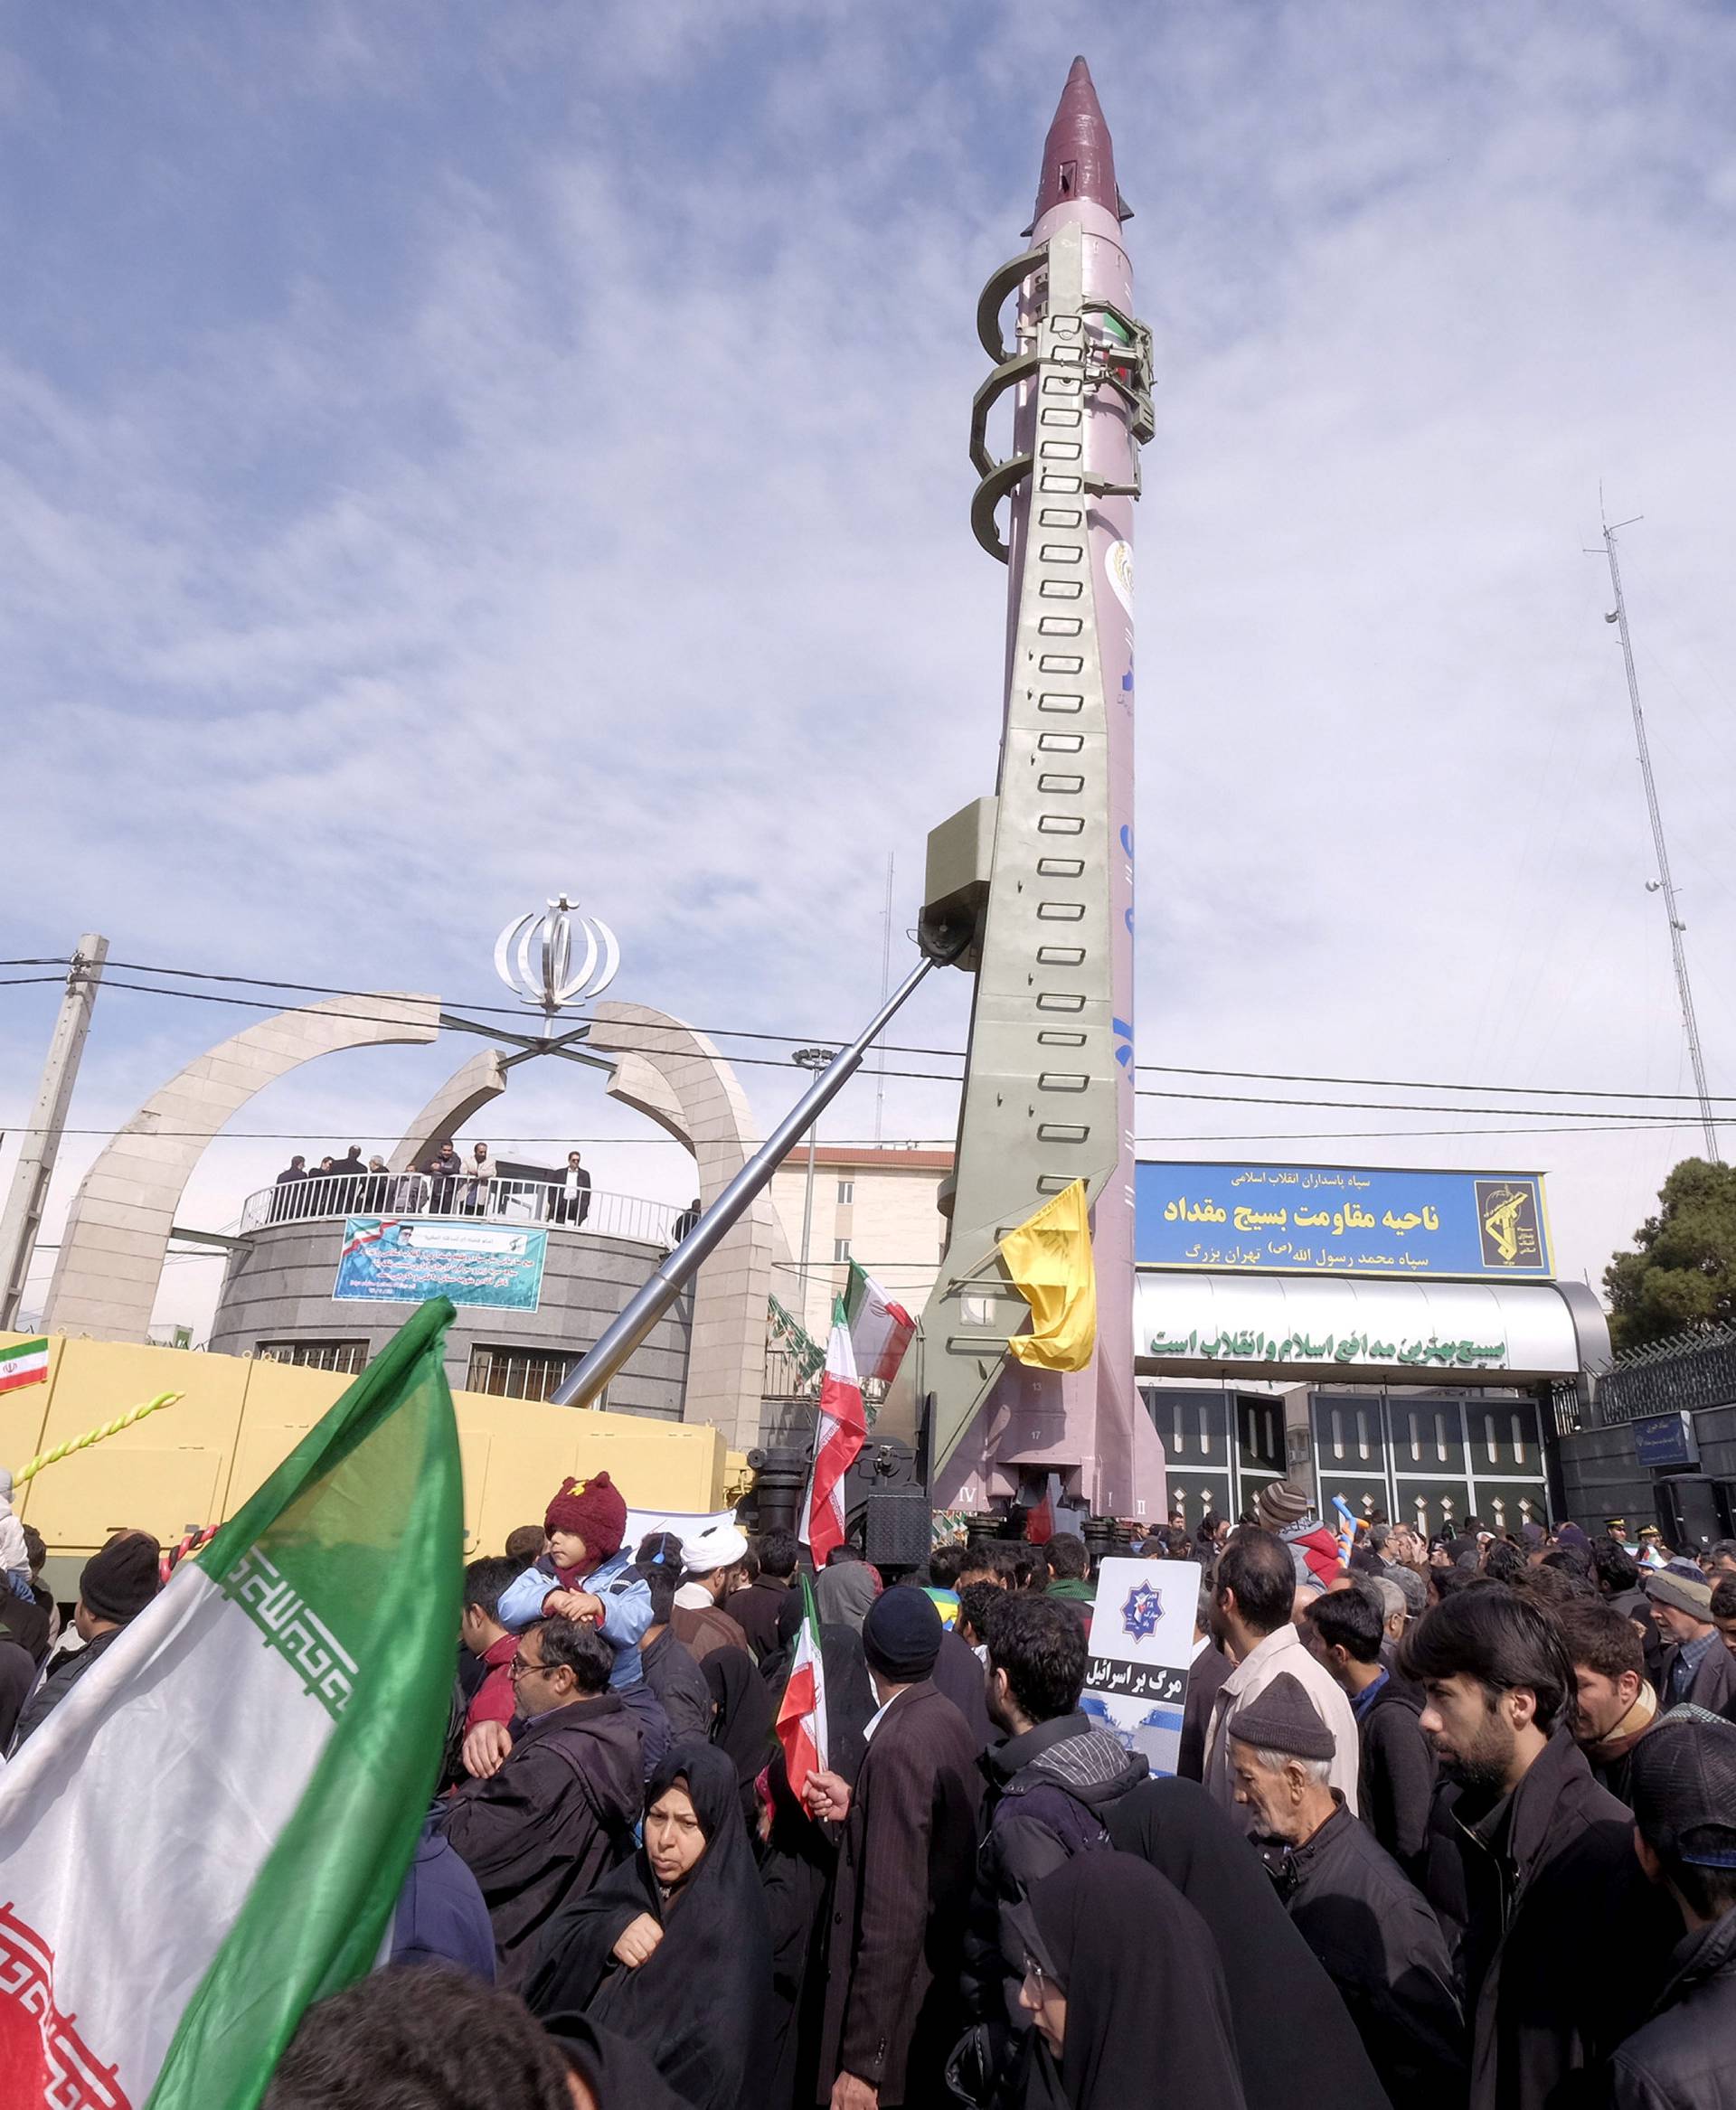 FILE PHOTO: Iranian-made Emad missile is displayed during a ceremony marking the 37th anniversary of the Islamic Revolution, in Tehran